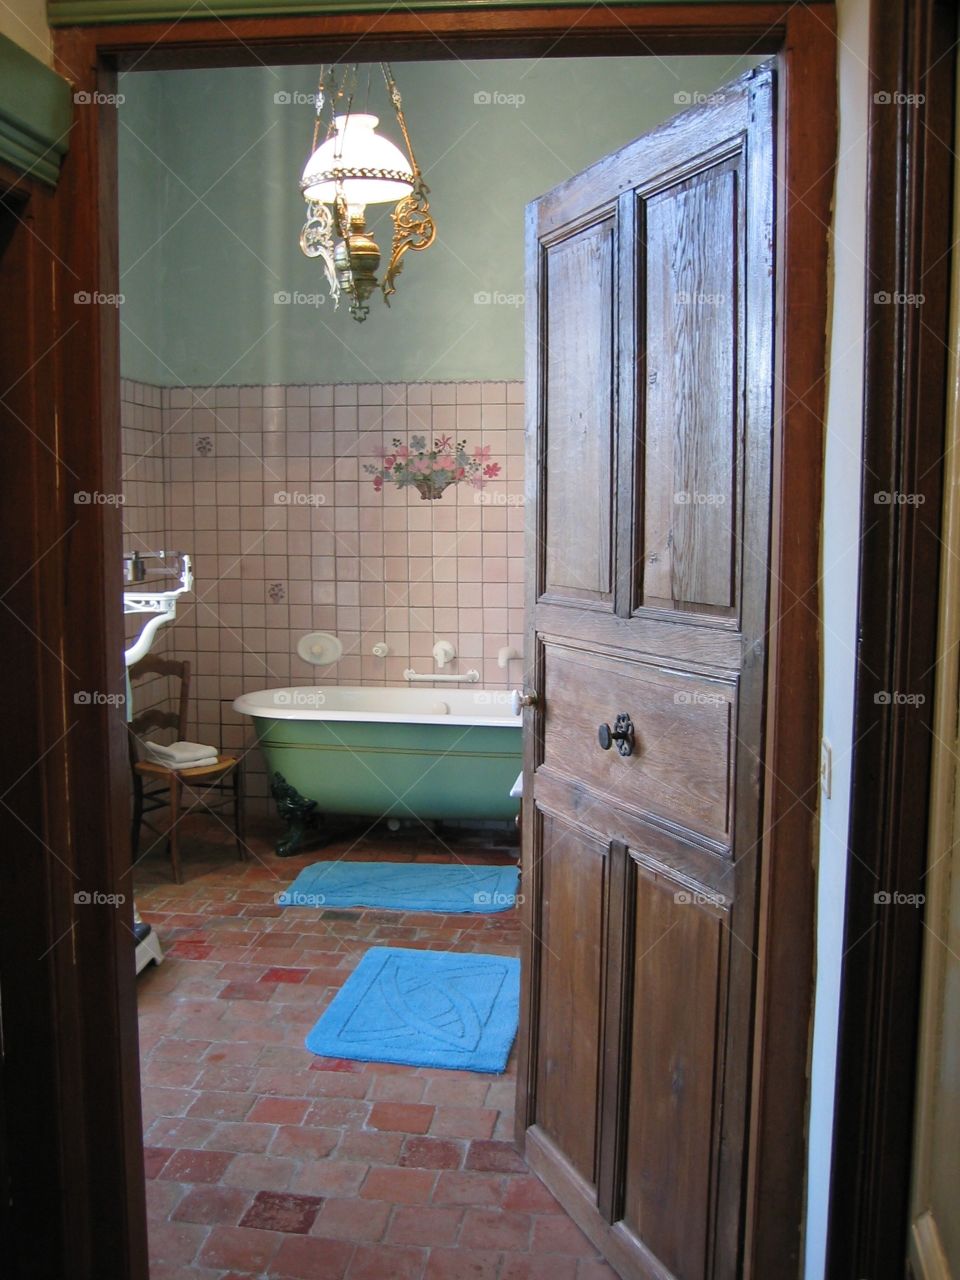 The Castle Bathroom. Bathroom in a French countryside Chateau